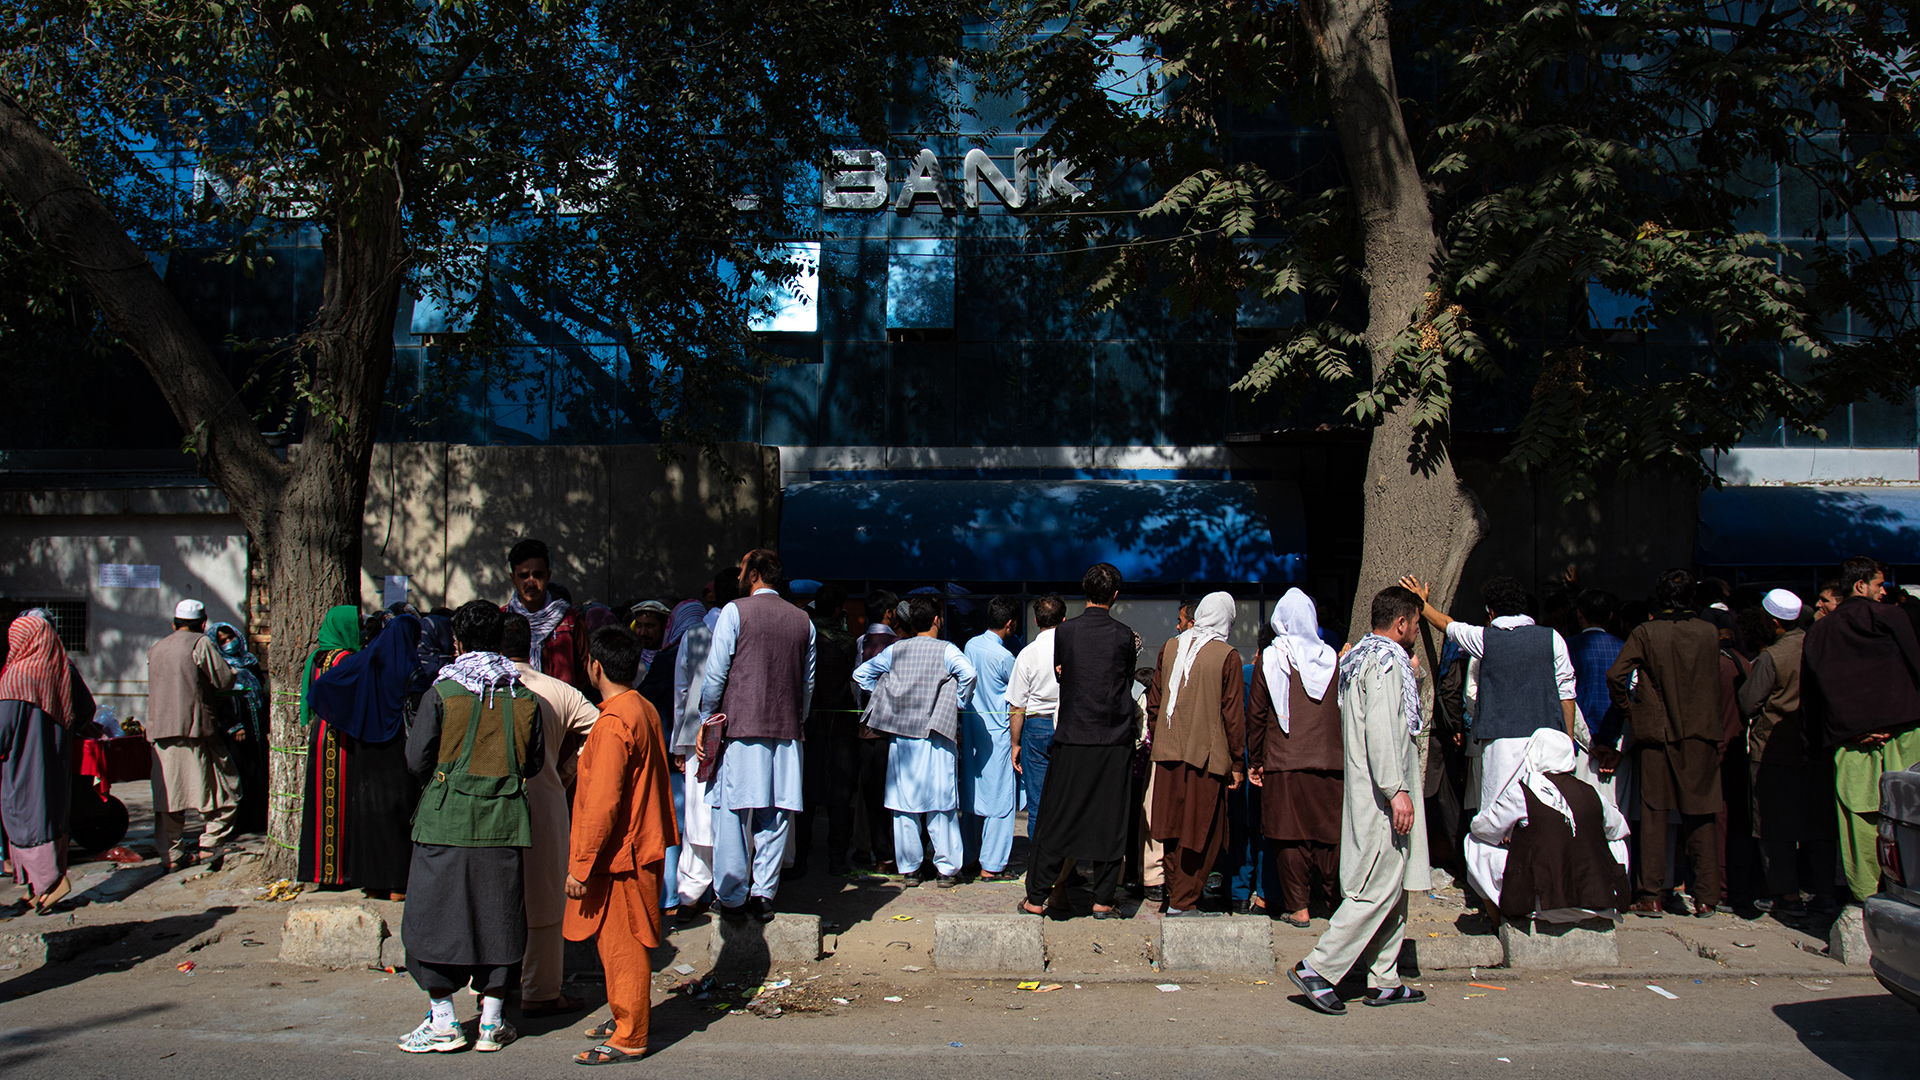 How is the World Bank aiding Afghanistan amidst humanitarian crisis and economic challenges?